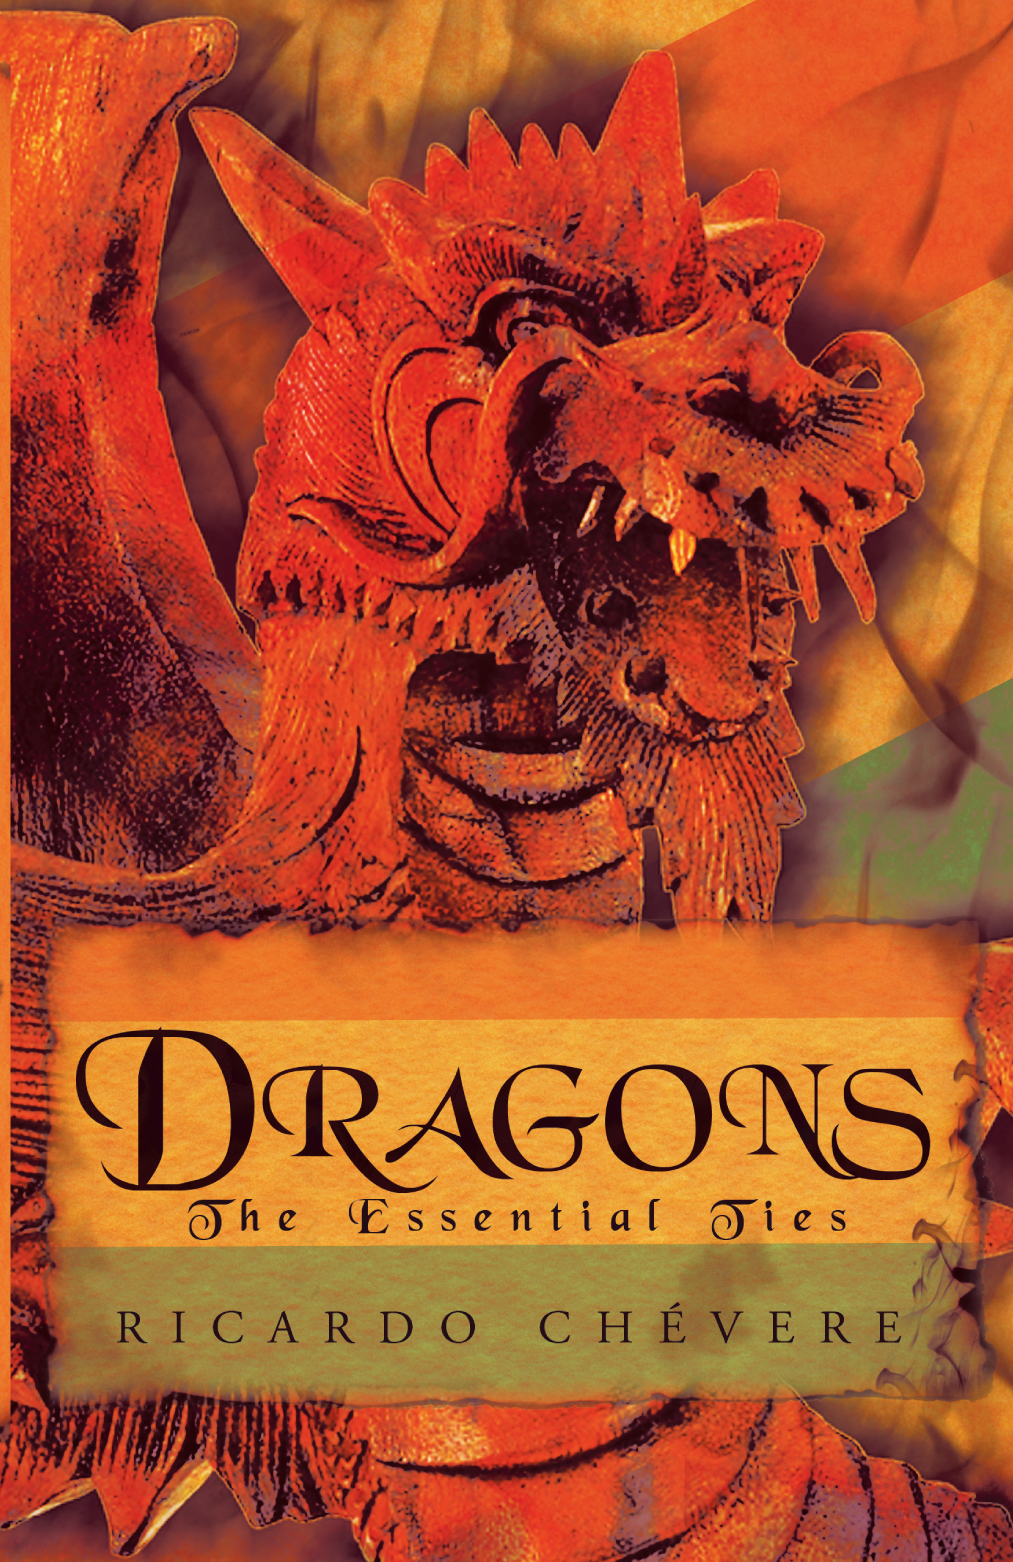 DRAGONS The Essential Ties